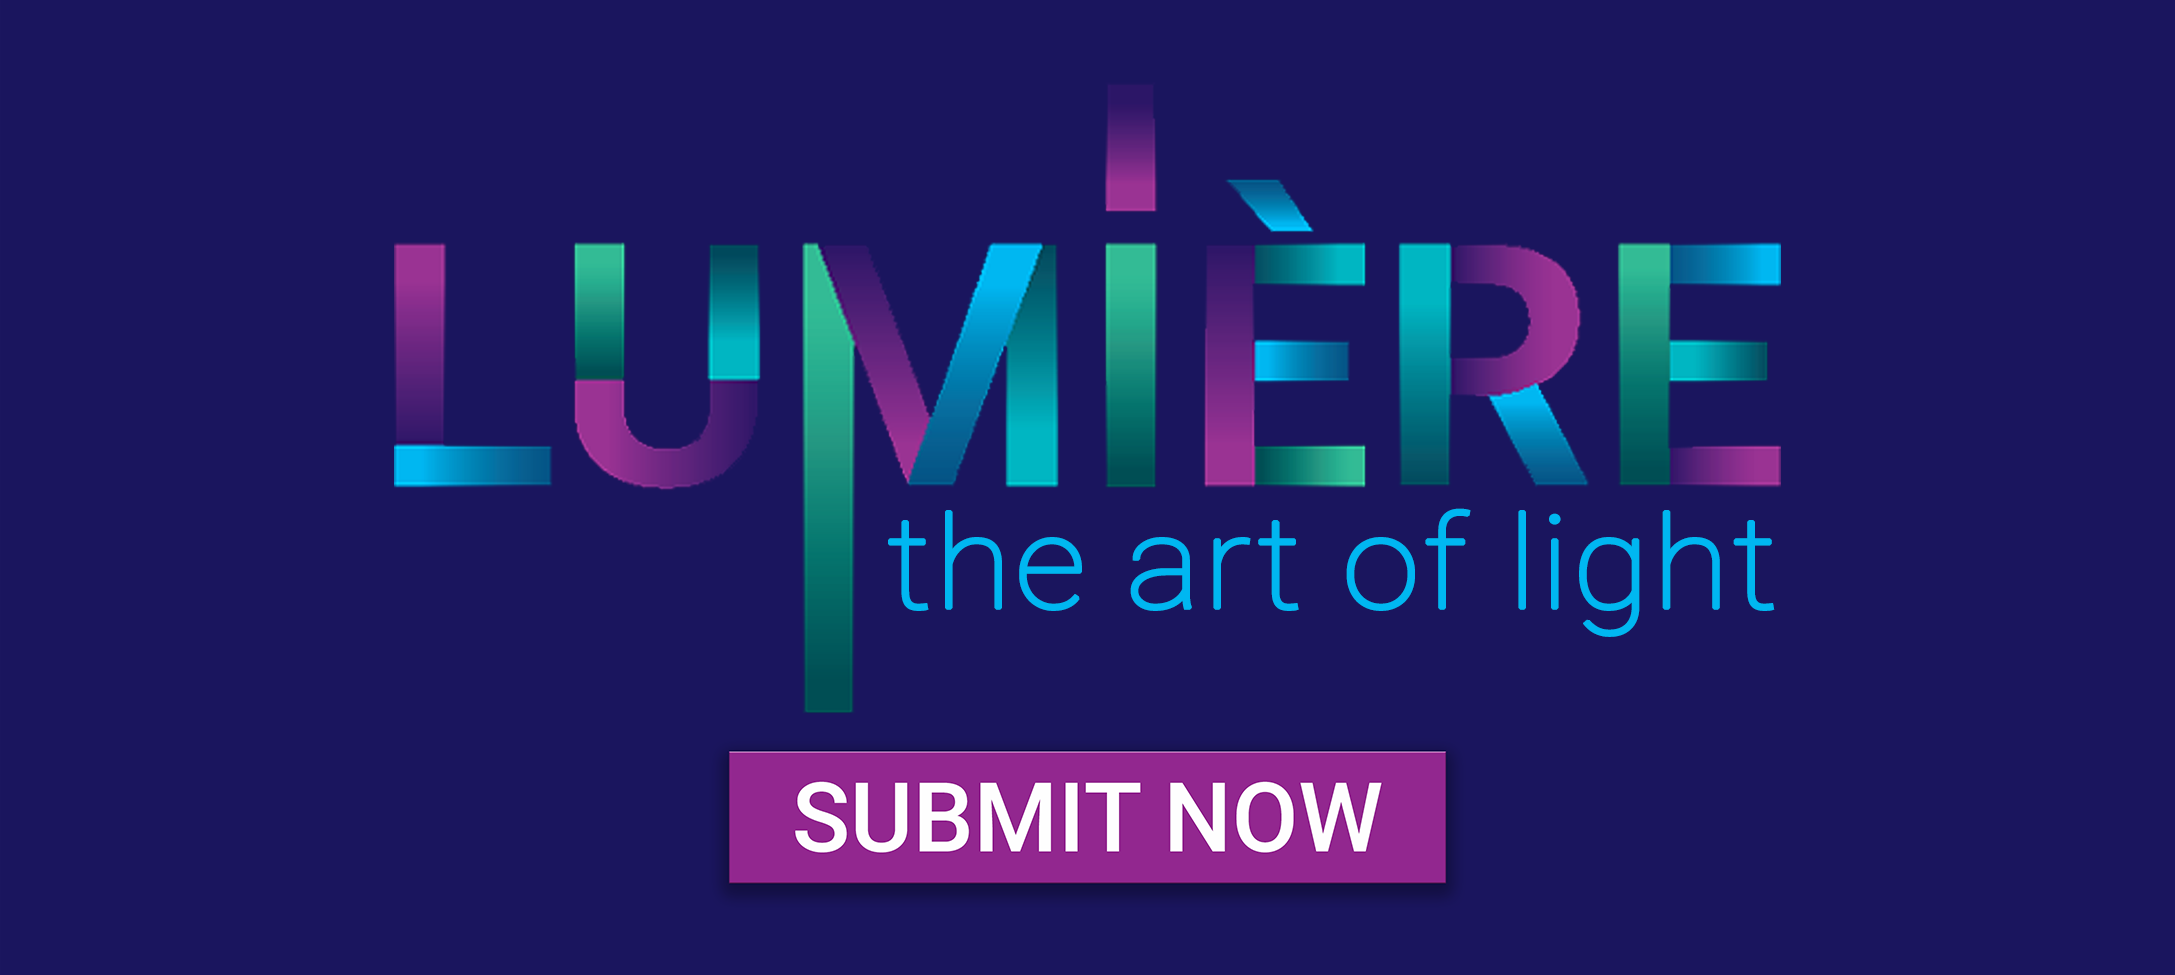 Lumiere: The Art of Light. Submit Now